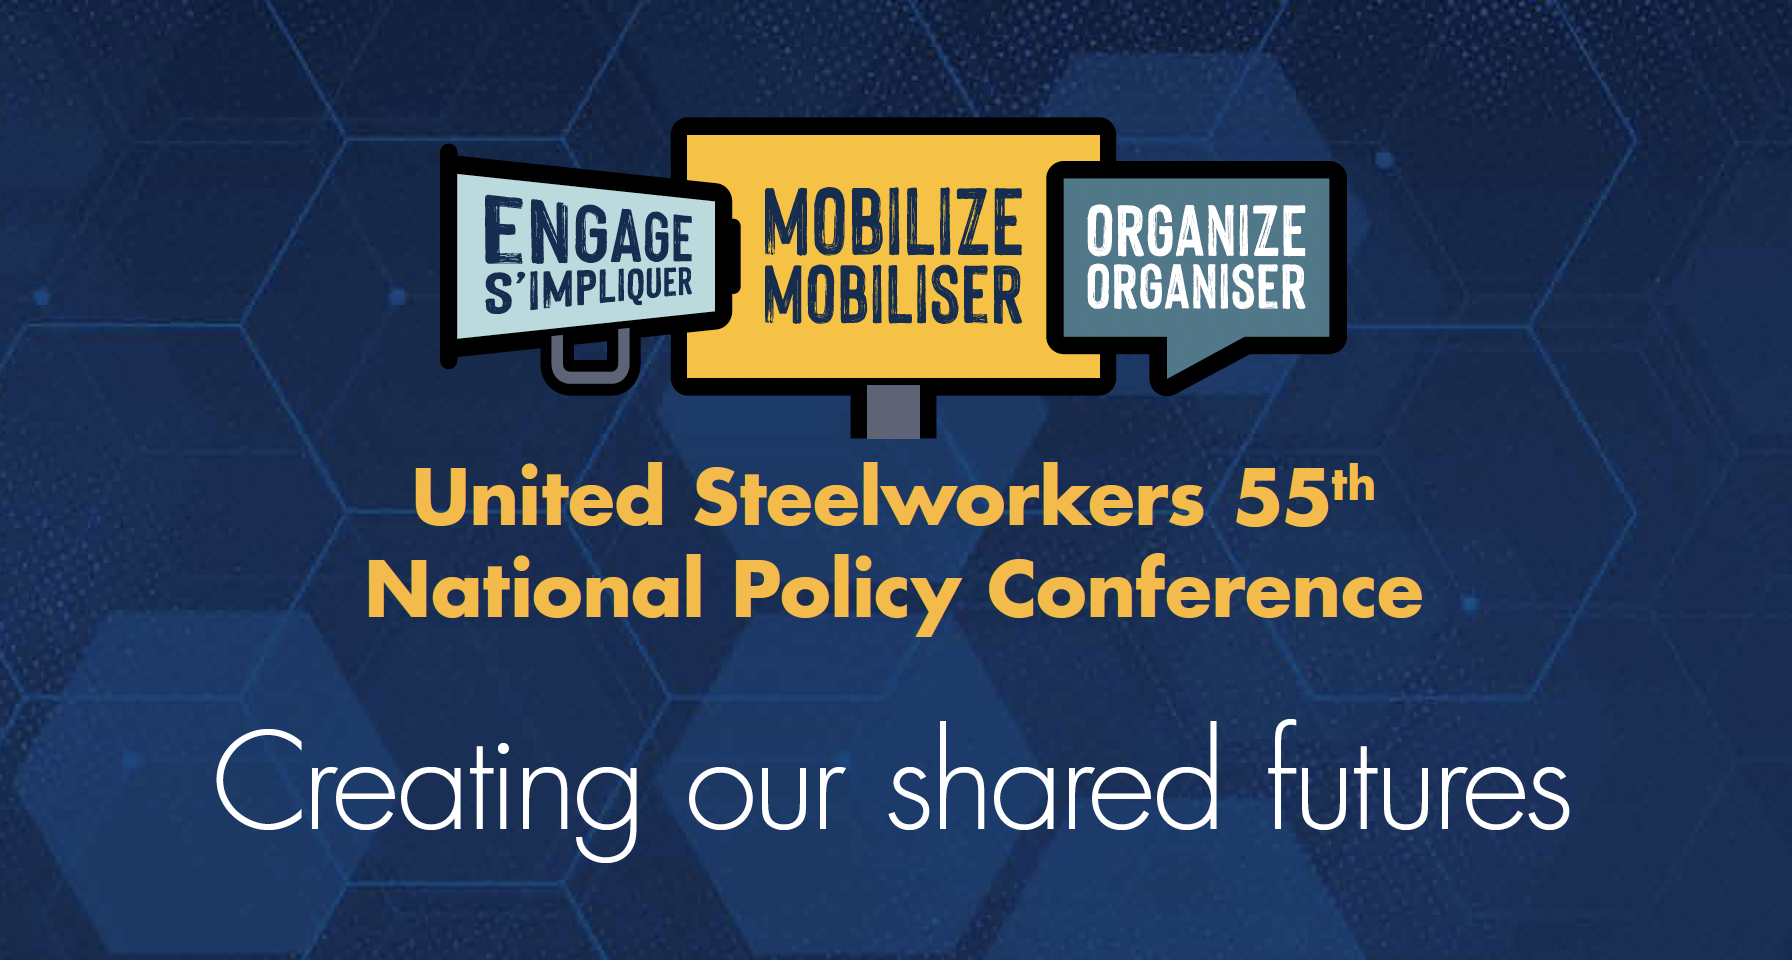 Image: Engage, Mobilize, Organize United Steelworkers 55th National Policy Conference – Creating our shared futures